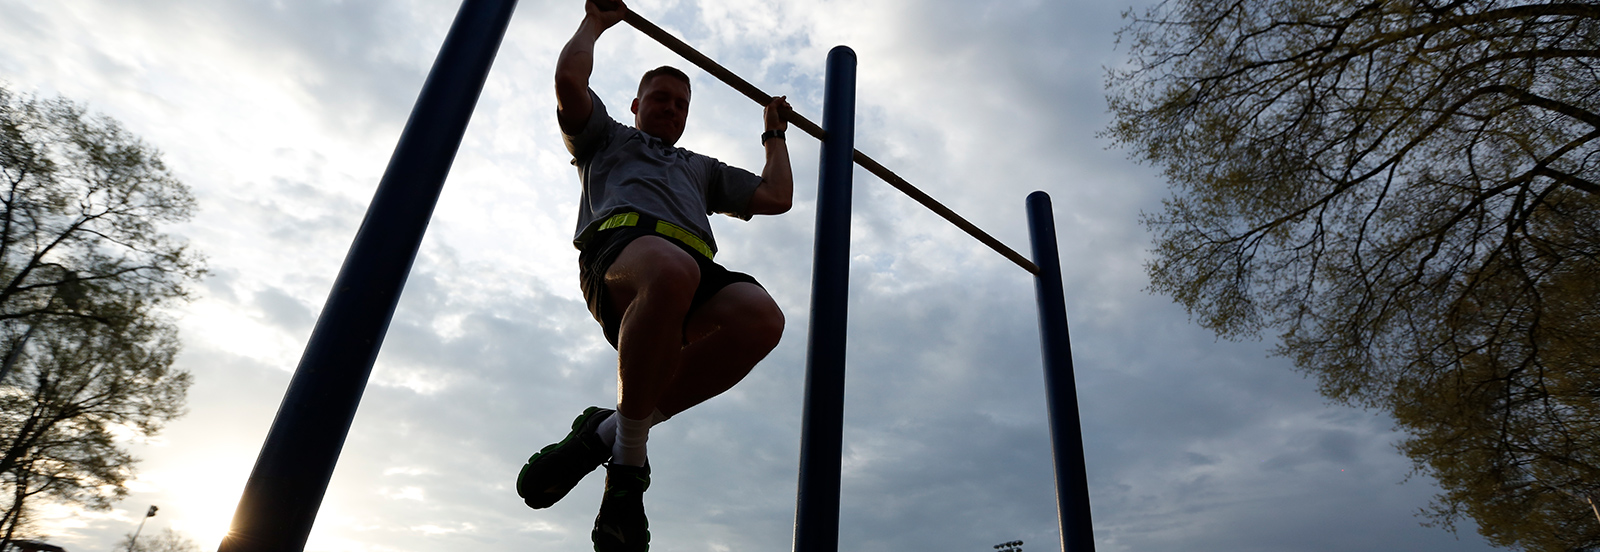 ROTC member working out on pull-up bar; subject is very shadowed due to lighting in the background